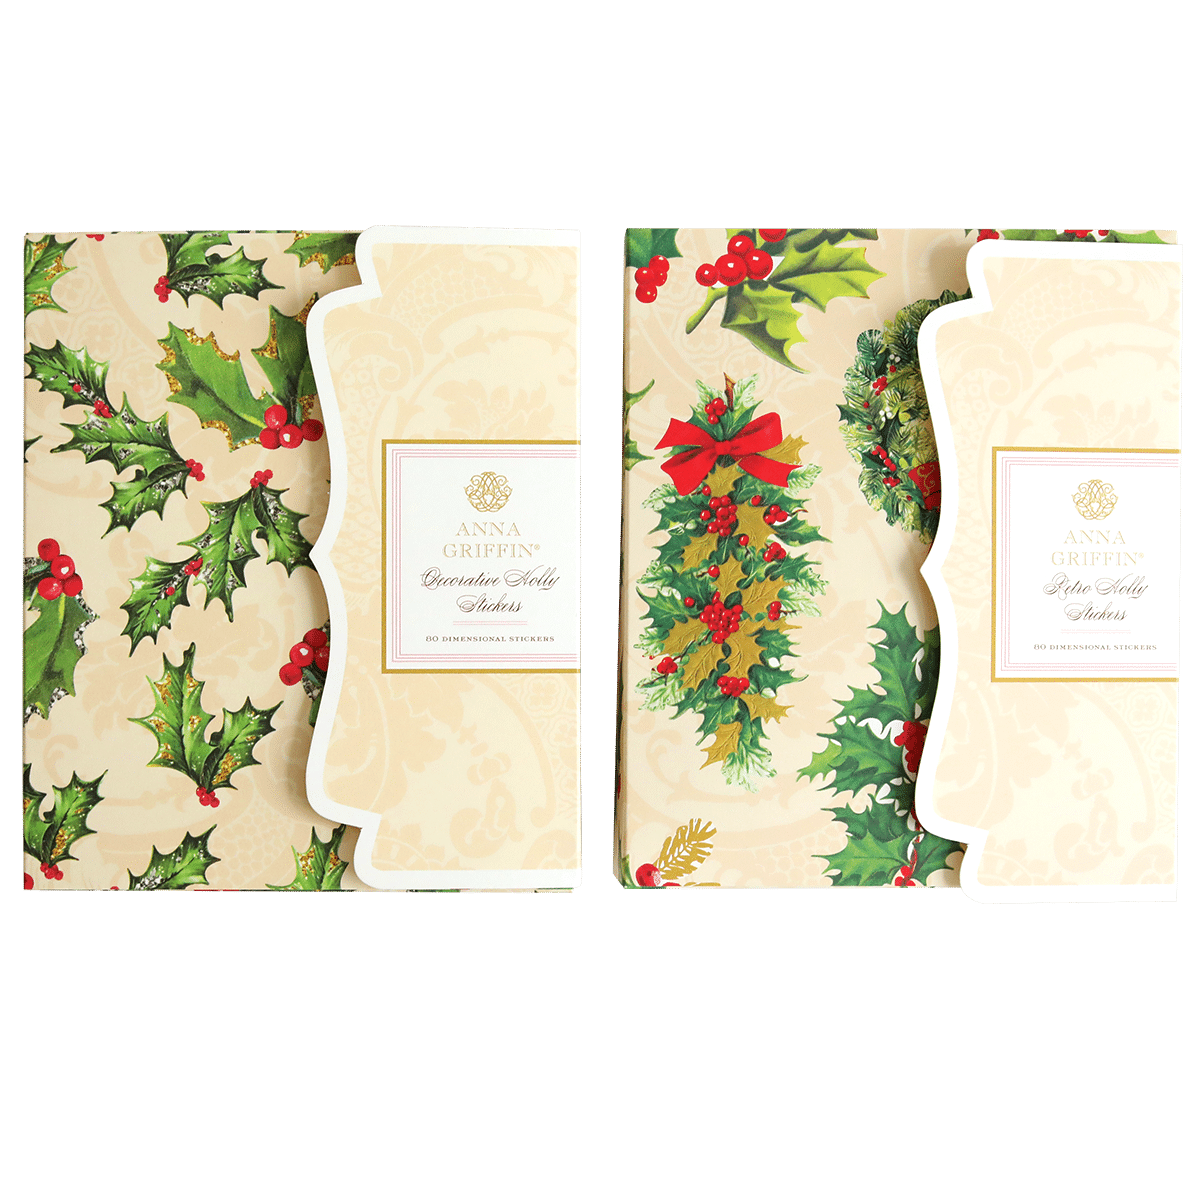 A set of Retro Holly Sticker Bundle with holly leaves and berries.